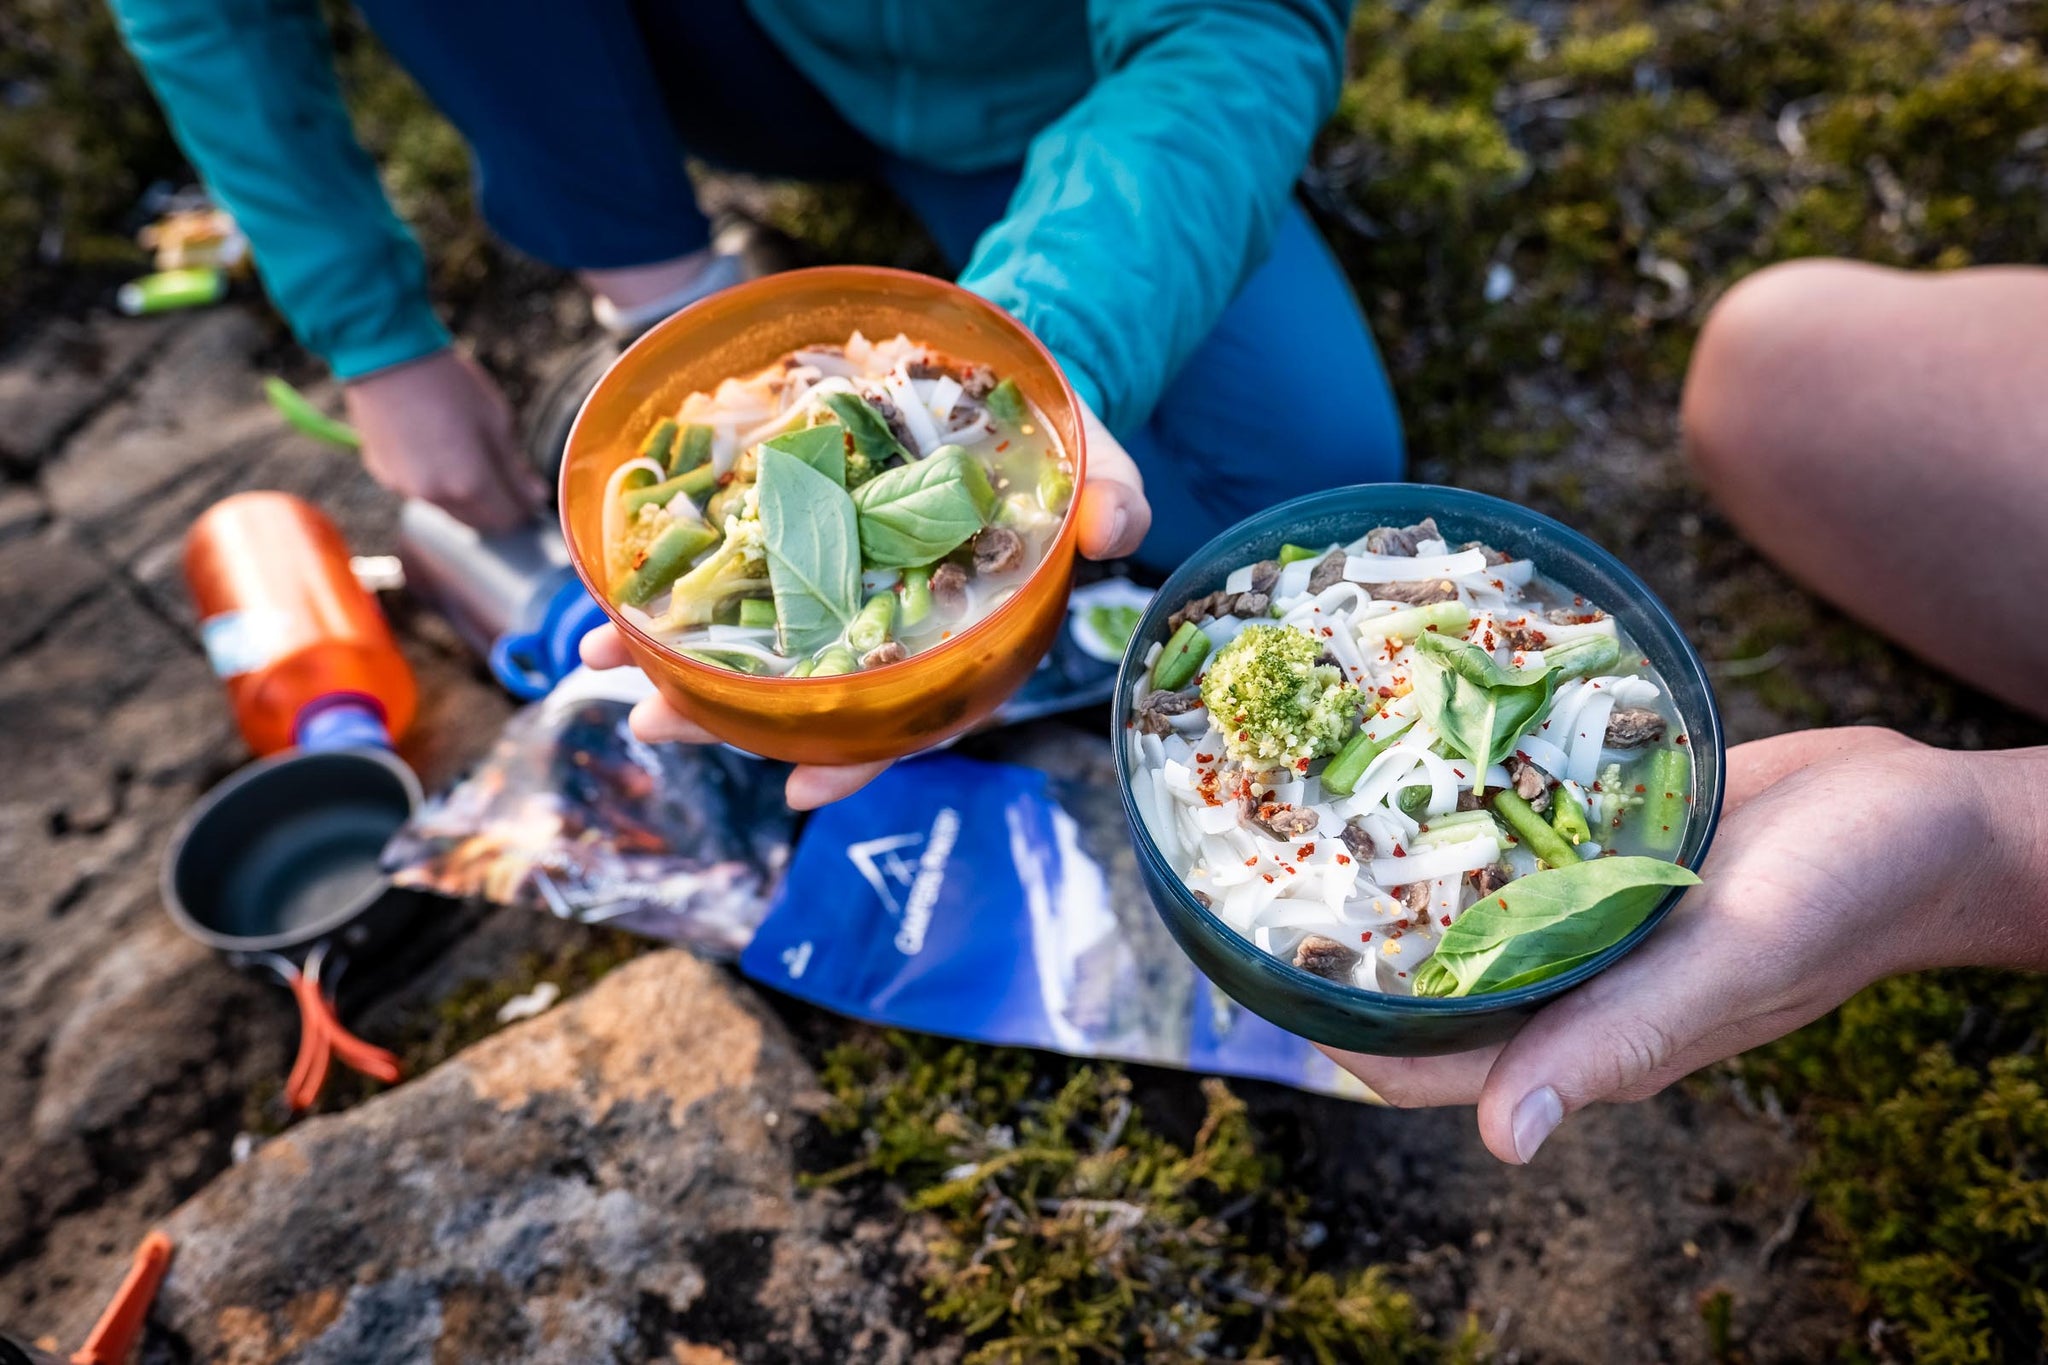 lightweight beef pho using Campers Pantry hiking food ingredients from the pantry range. Unlike dehydrated meals this is way lighter so you wont know you are carrying it. Meal plan this on your next Overland Track trip in Tasmania.